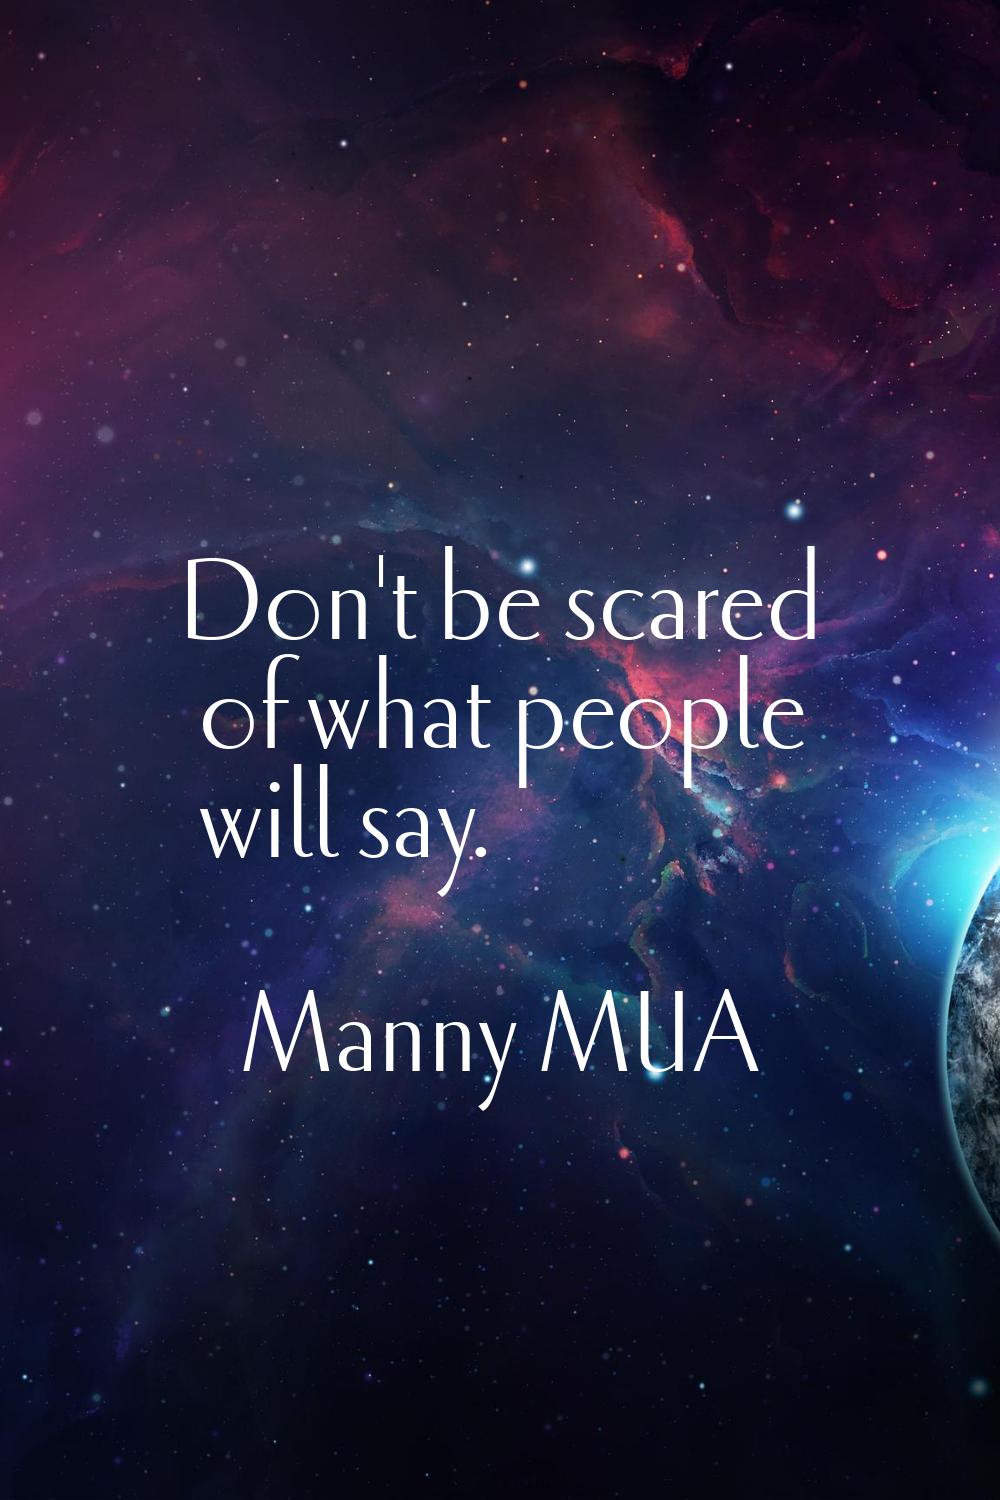 Don't be scared of what people will say.